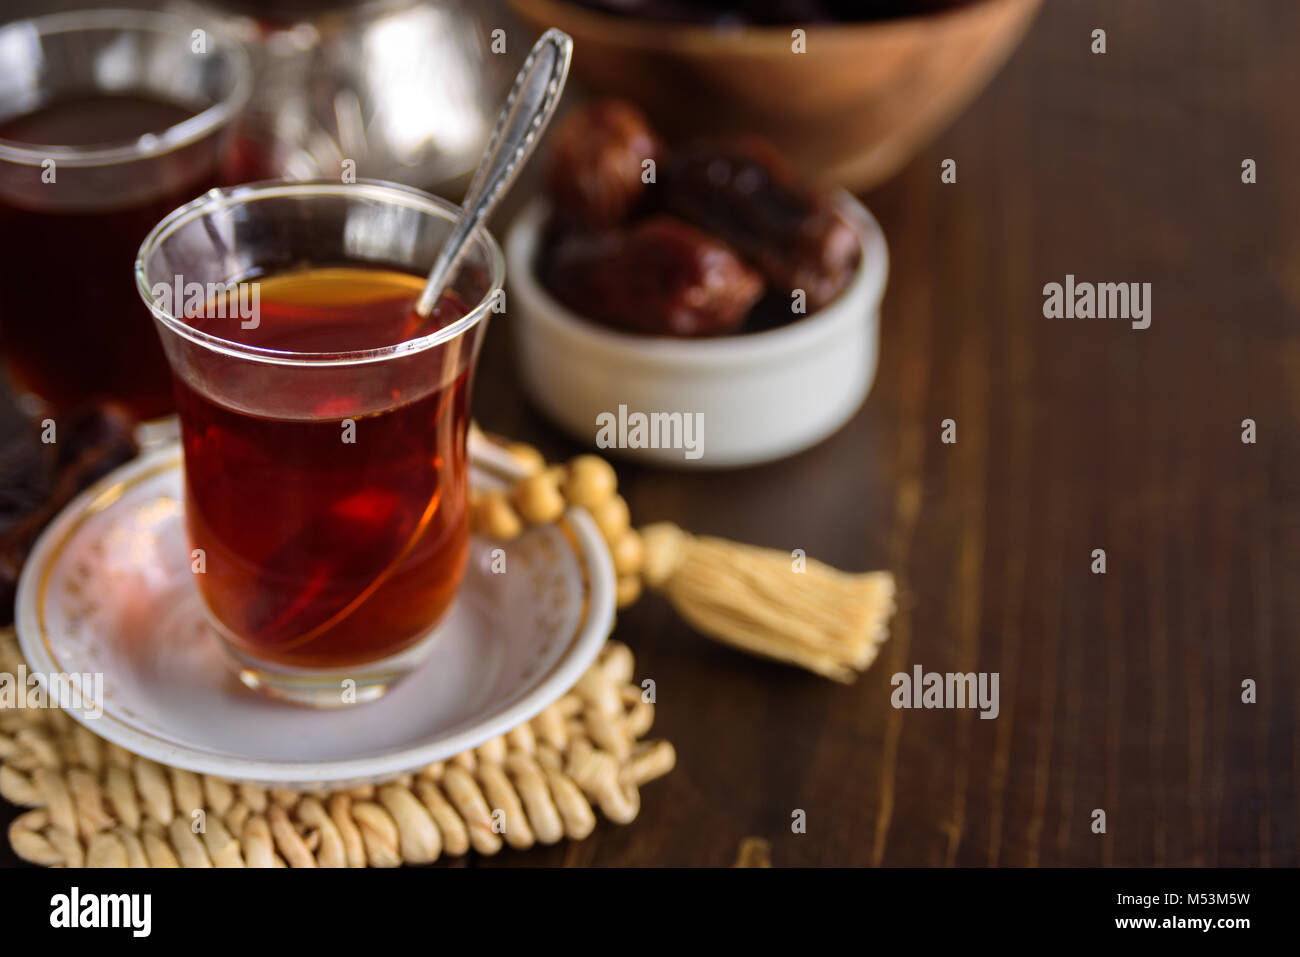 Dried dates fruits with tea for iftar. Prayer beads on background Stock Photo